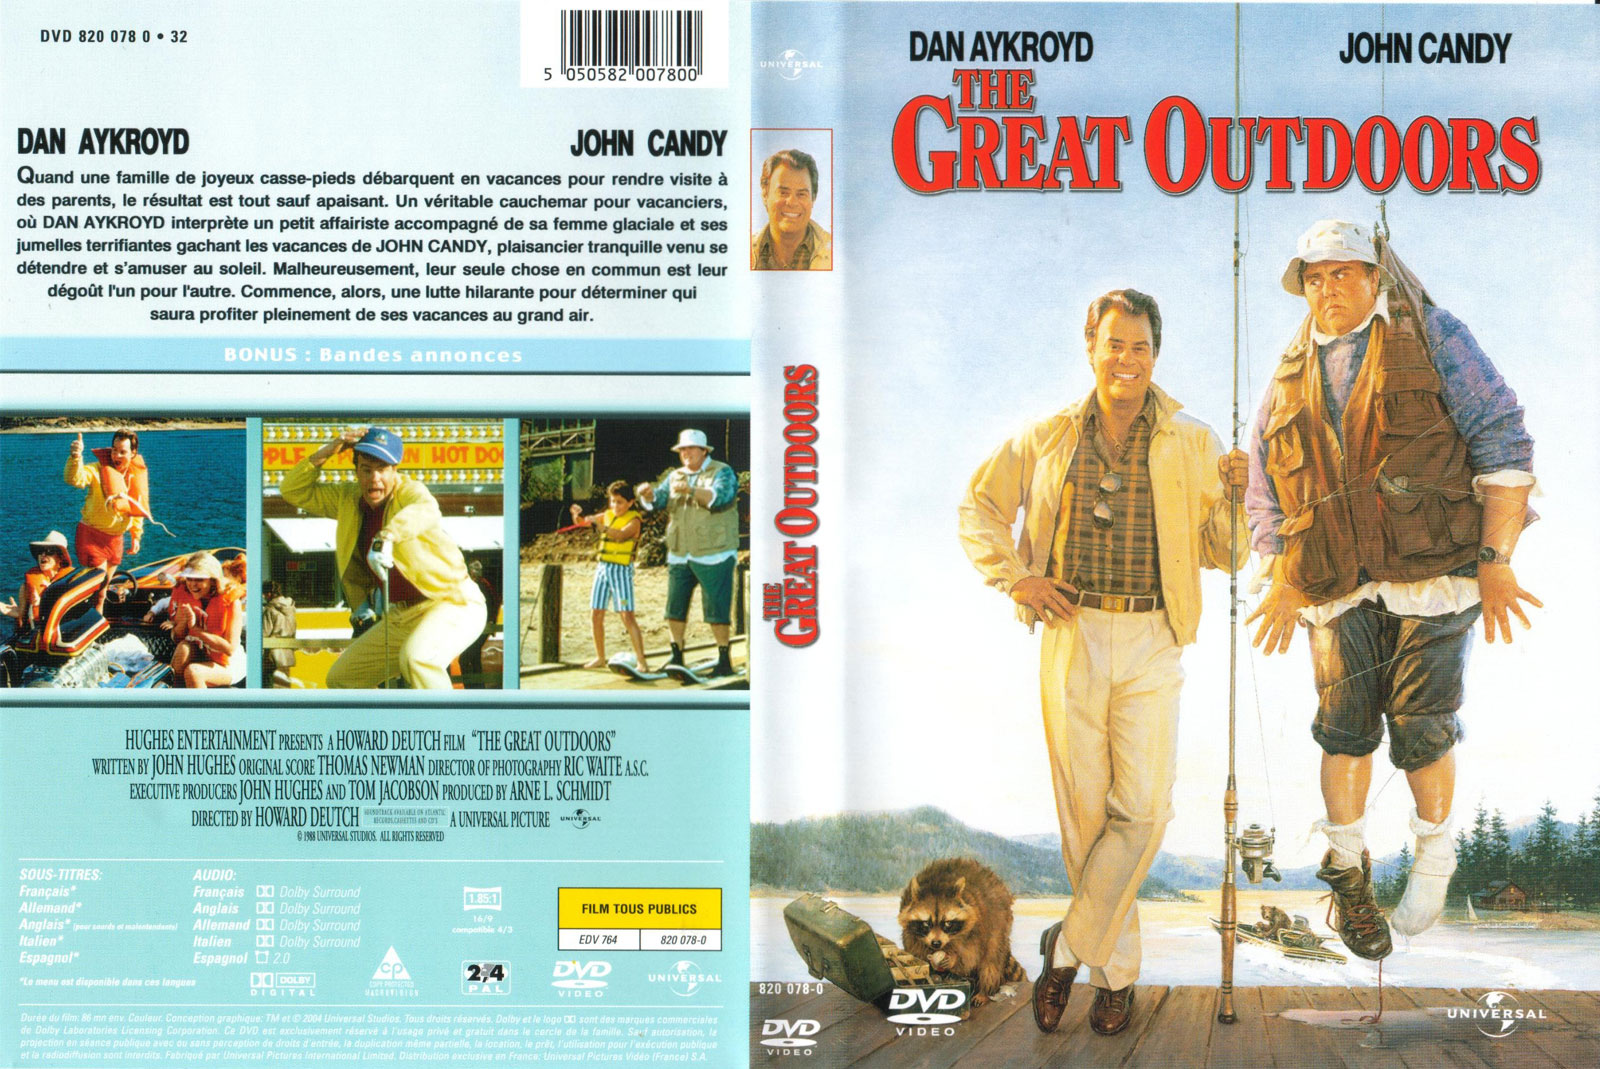 Jaquette DVD The_great_outdoors